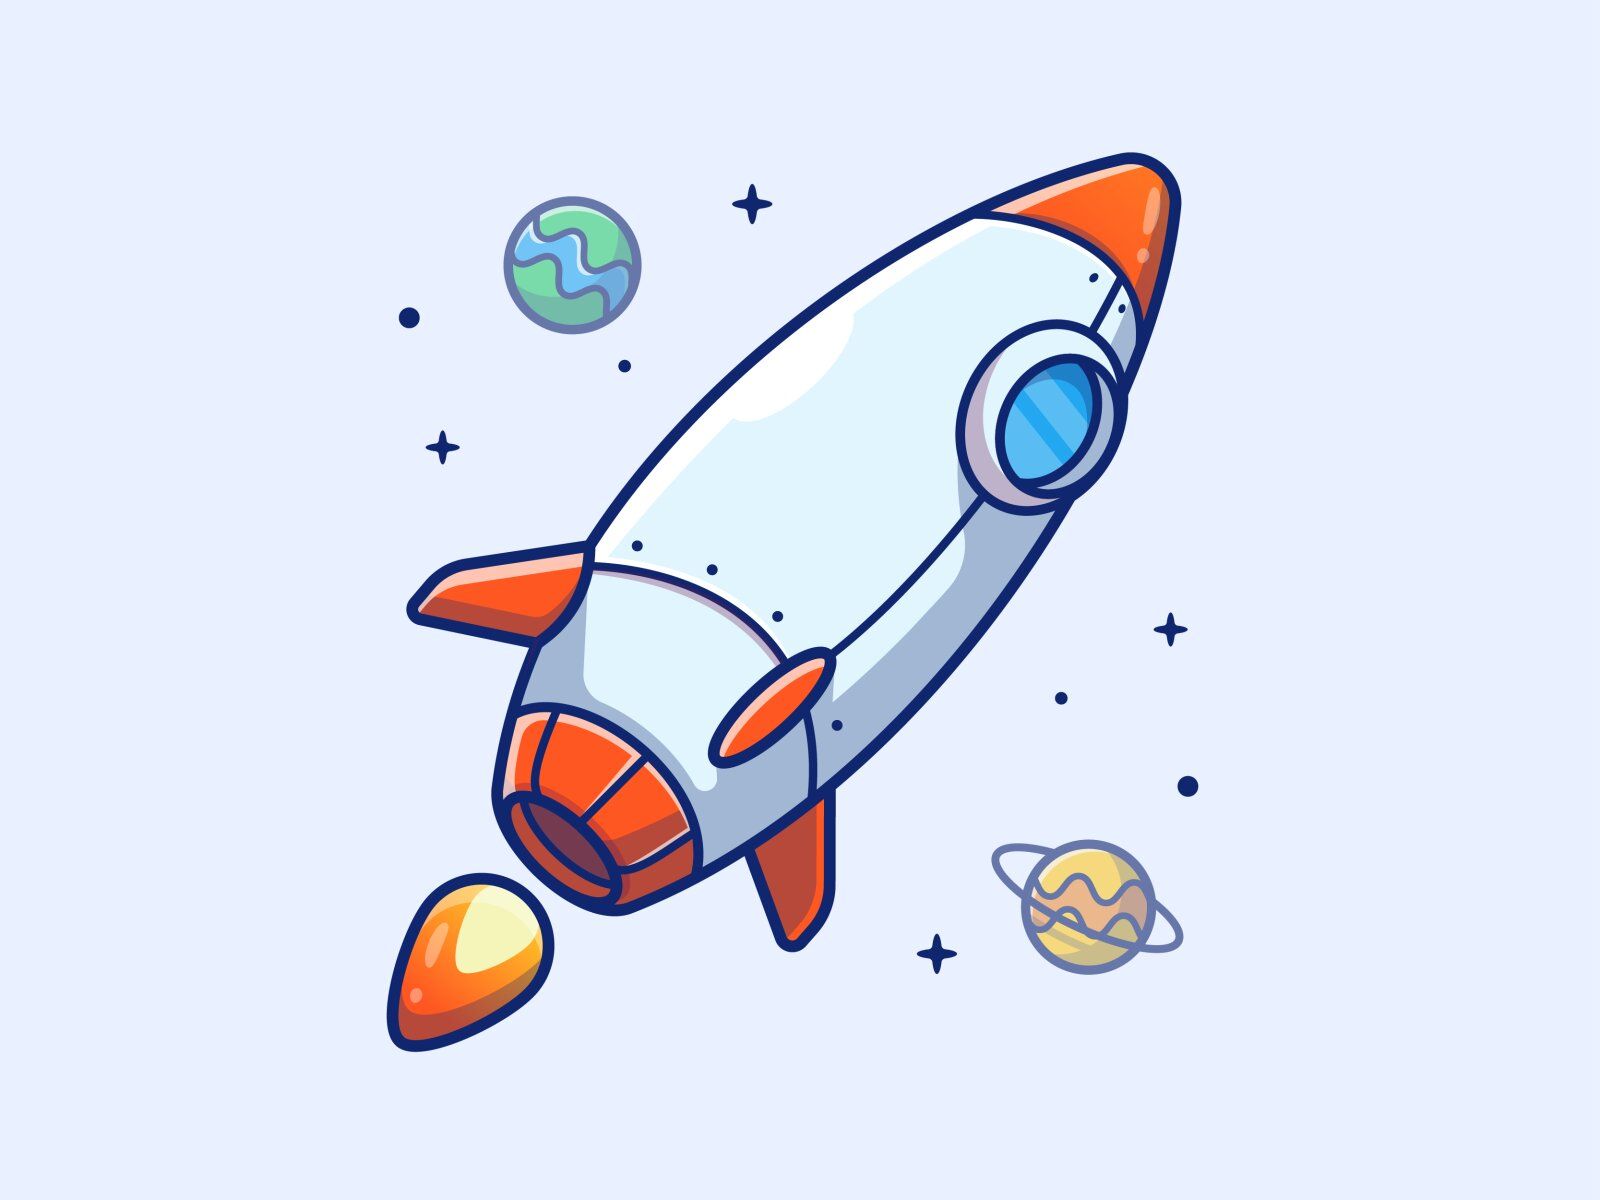 The next step is app release! (*image by [catalyst](https://dribbble.com/catalystvibes){ rel="nofollow" target="_blank" .default-md}*)